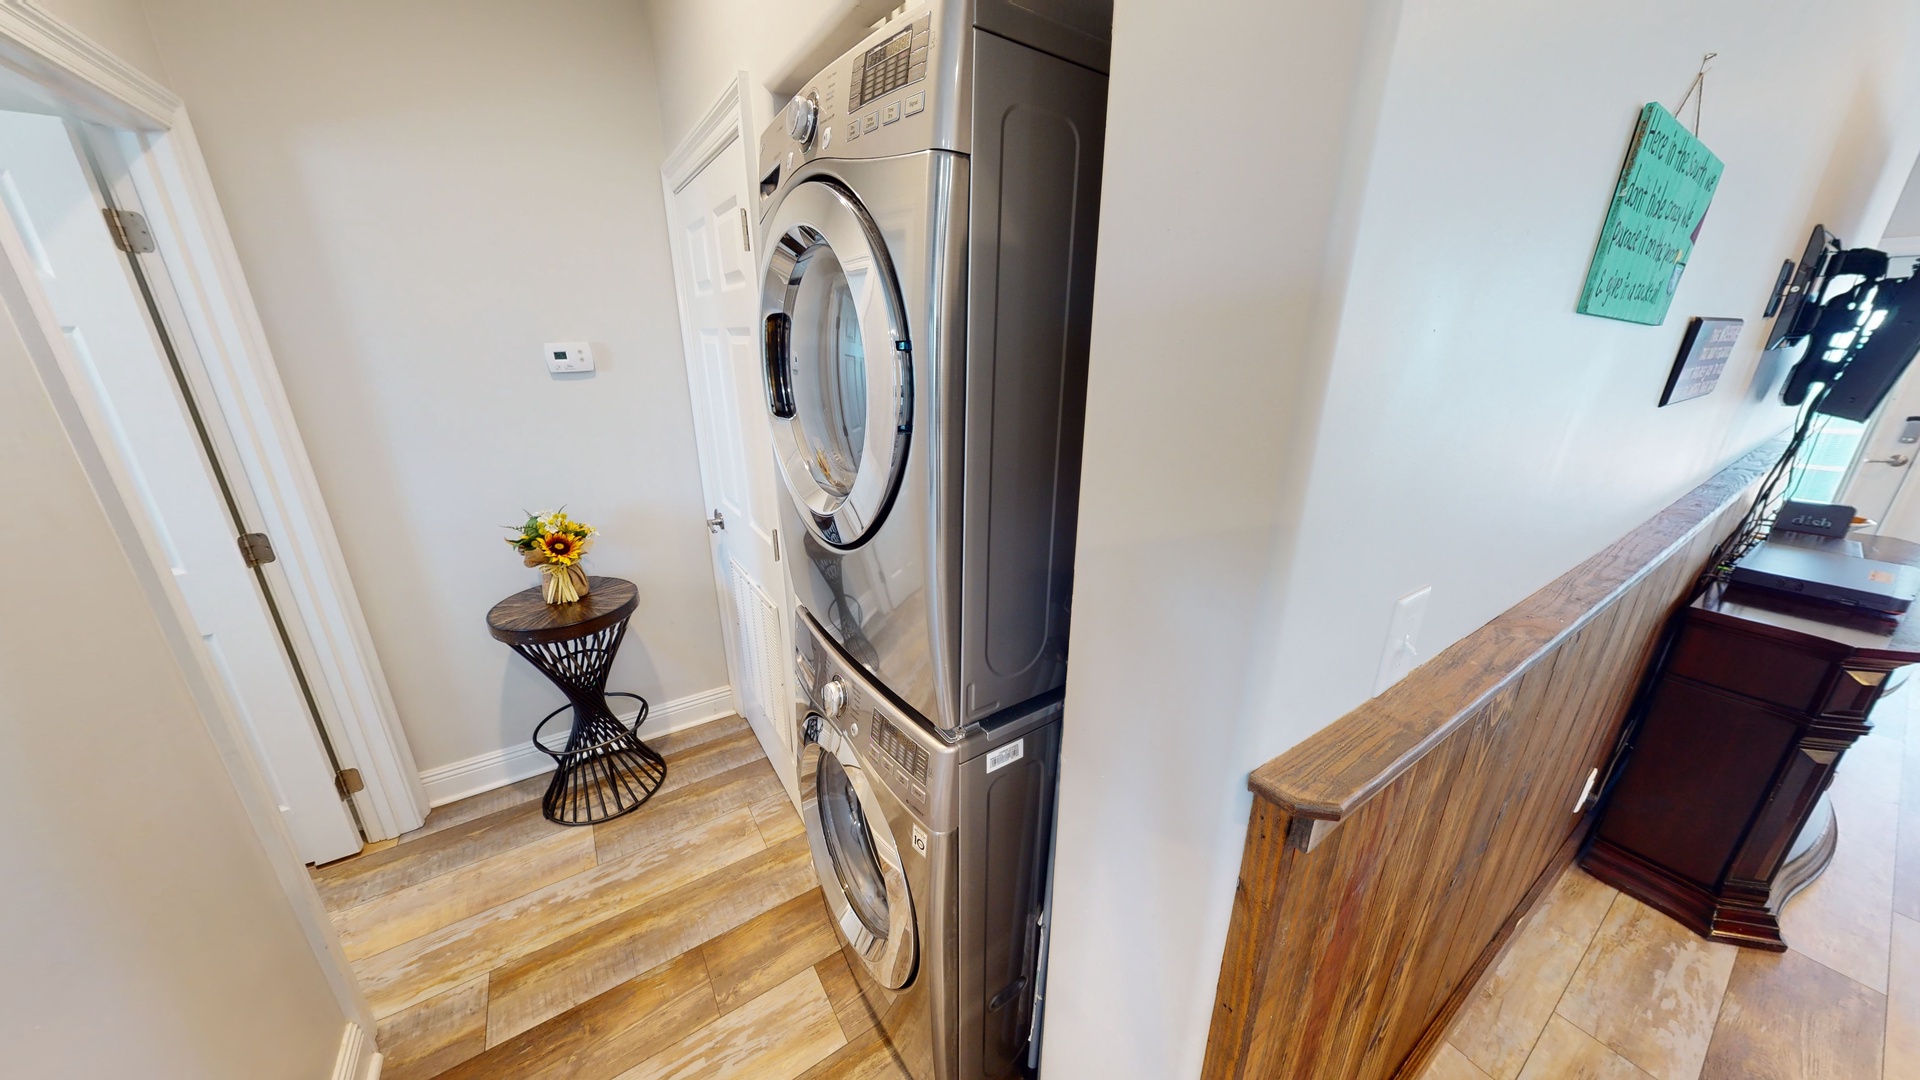 Full size washer and dryer on the 1st floor